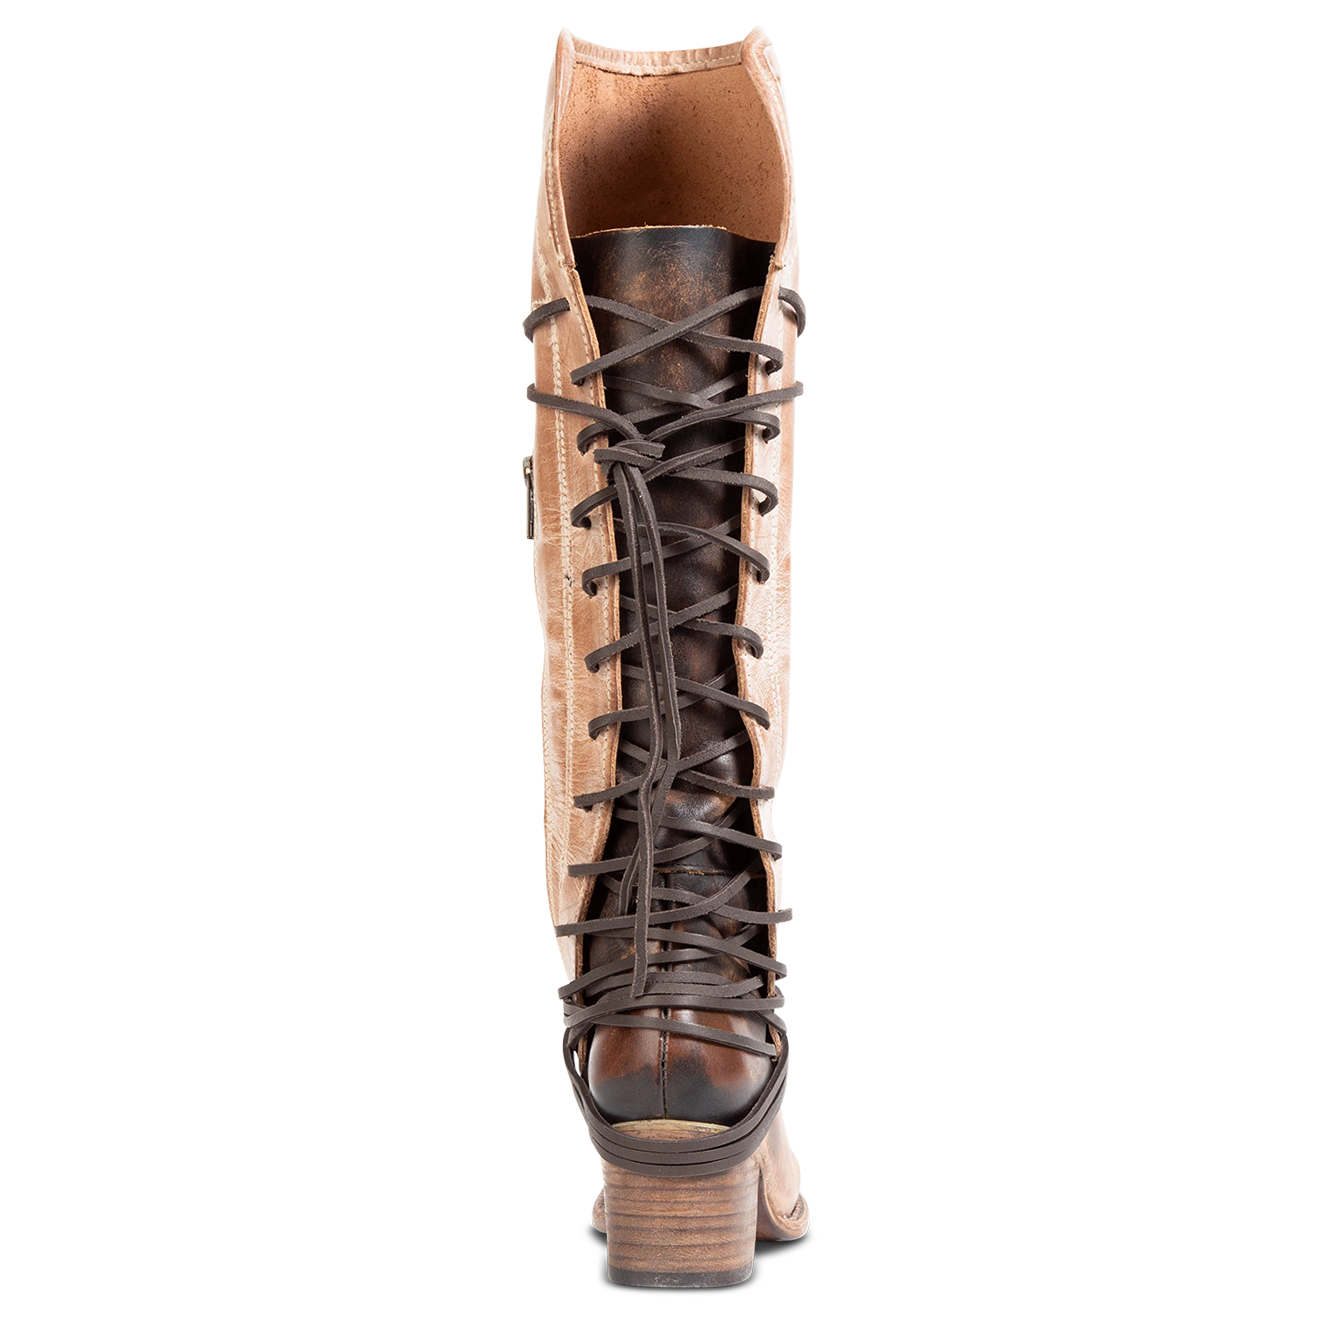 Back view showing expandable panel with adjustable leather lacing on FREEBIRD by Steven women's Coal taupe tall boot